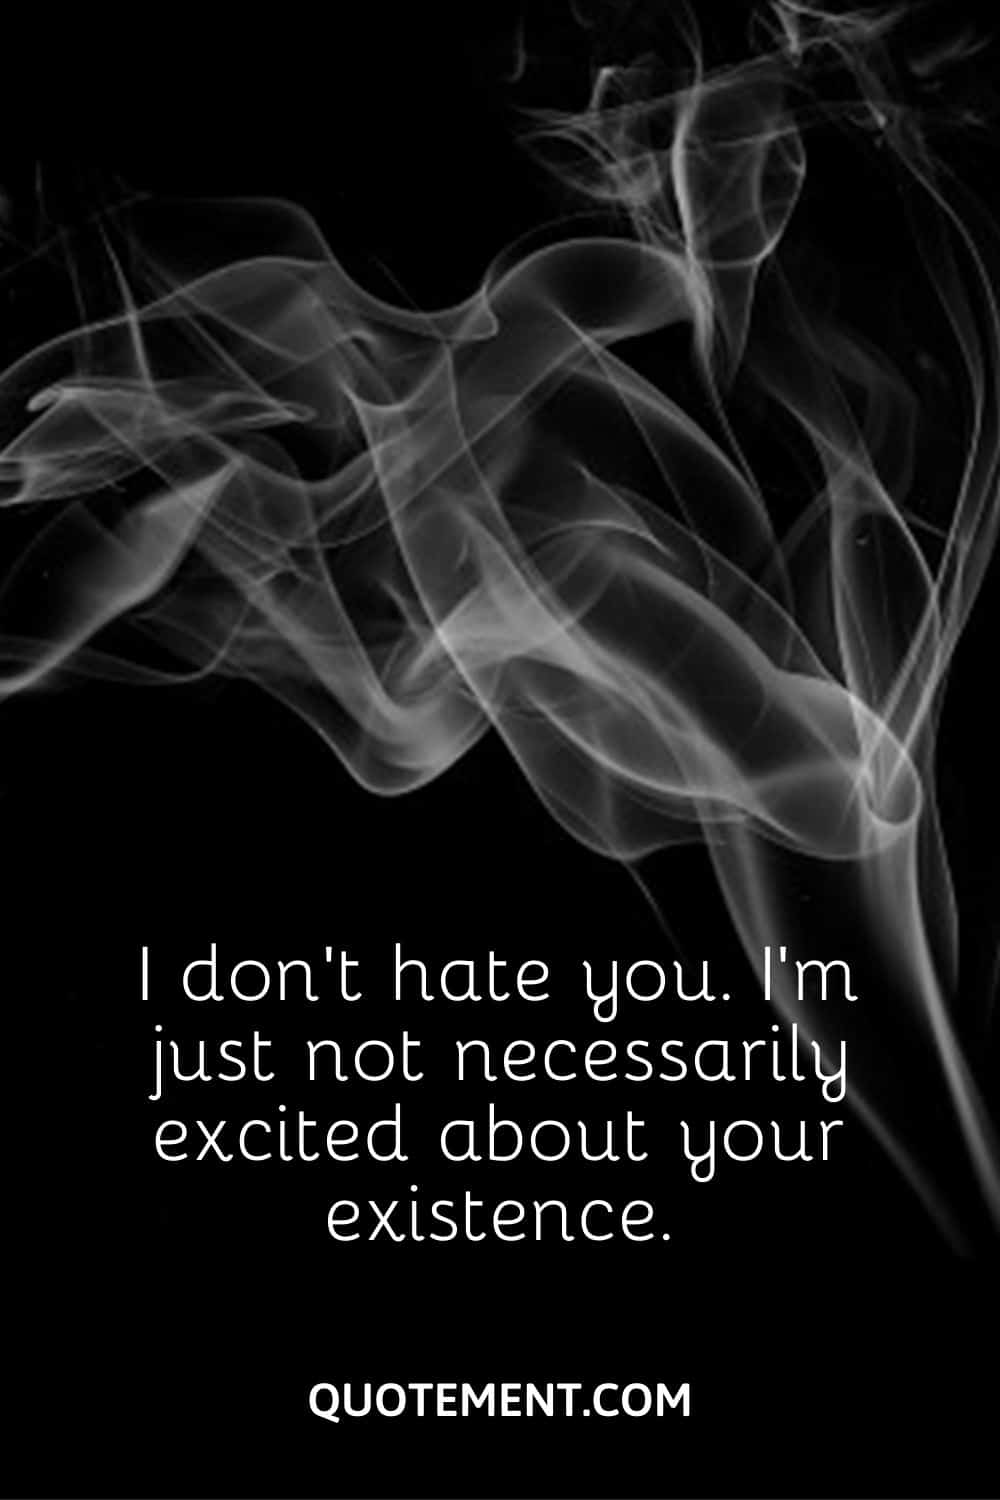 I don't hate you. I'm just not necessarily excited about your existence.